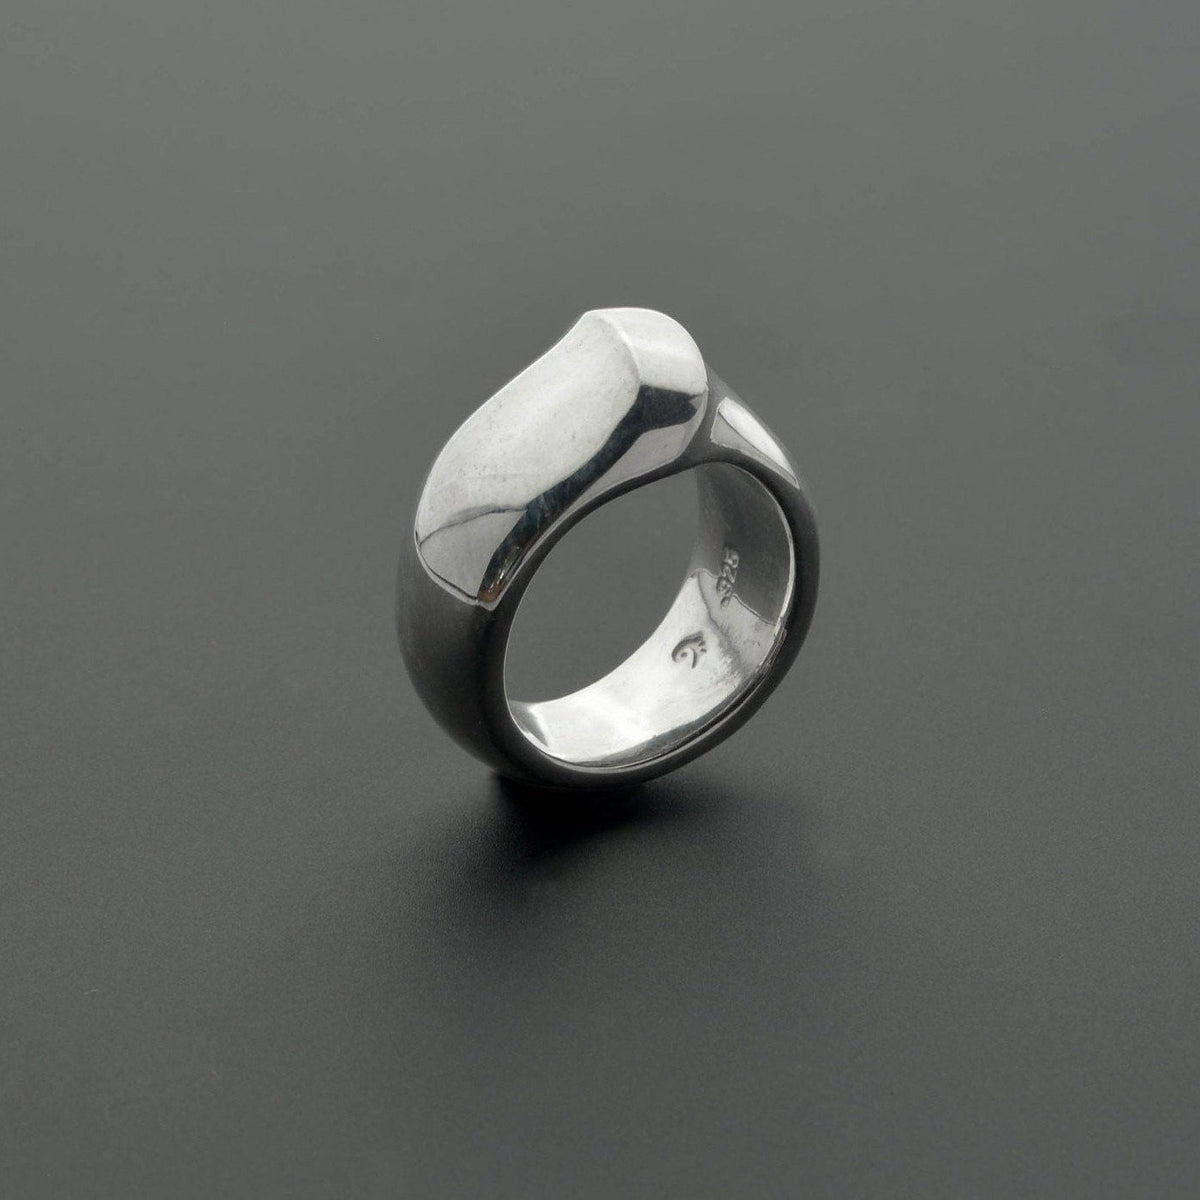 Classy love ring with bold forms